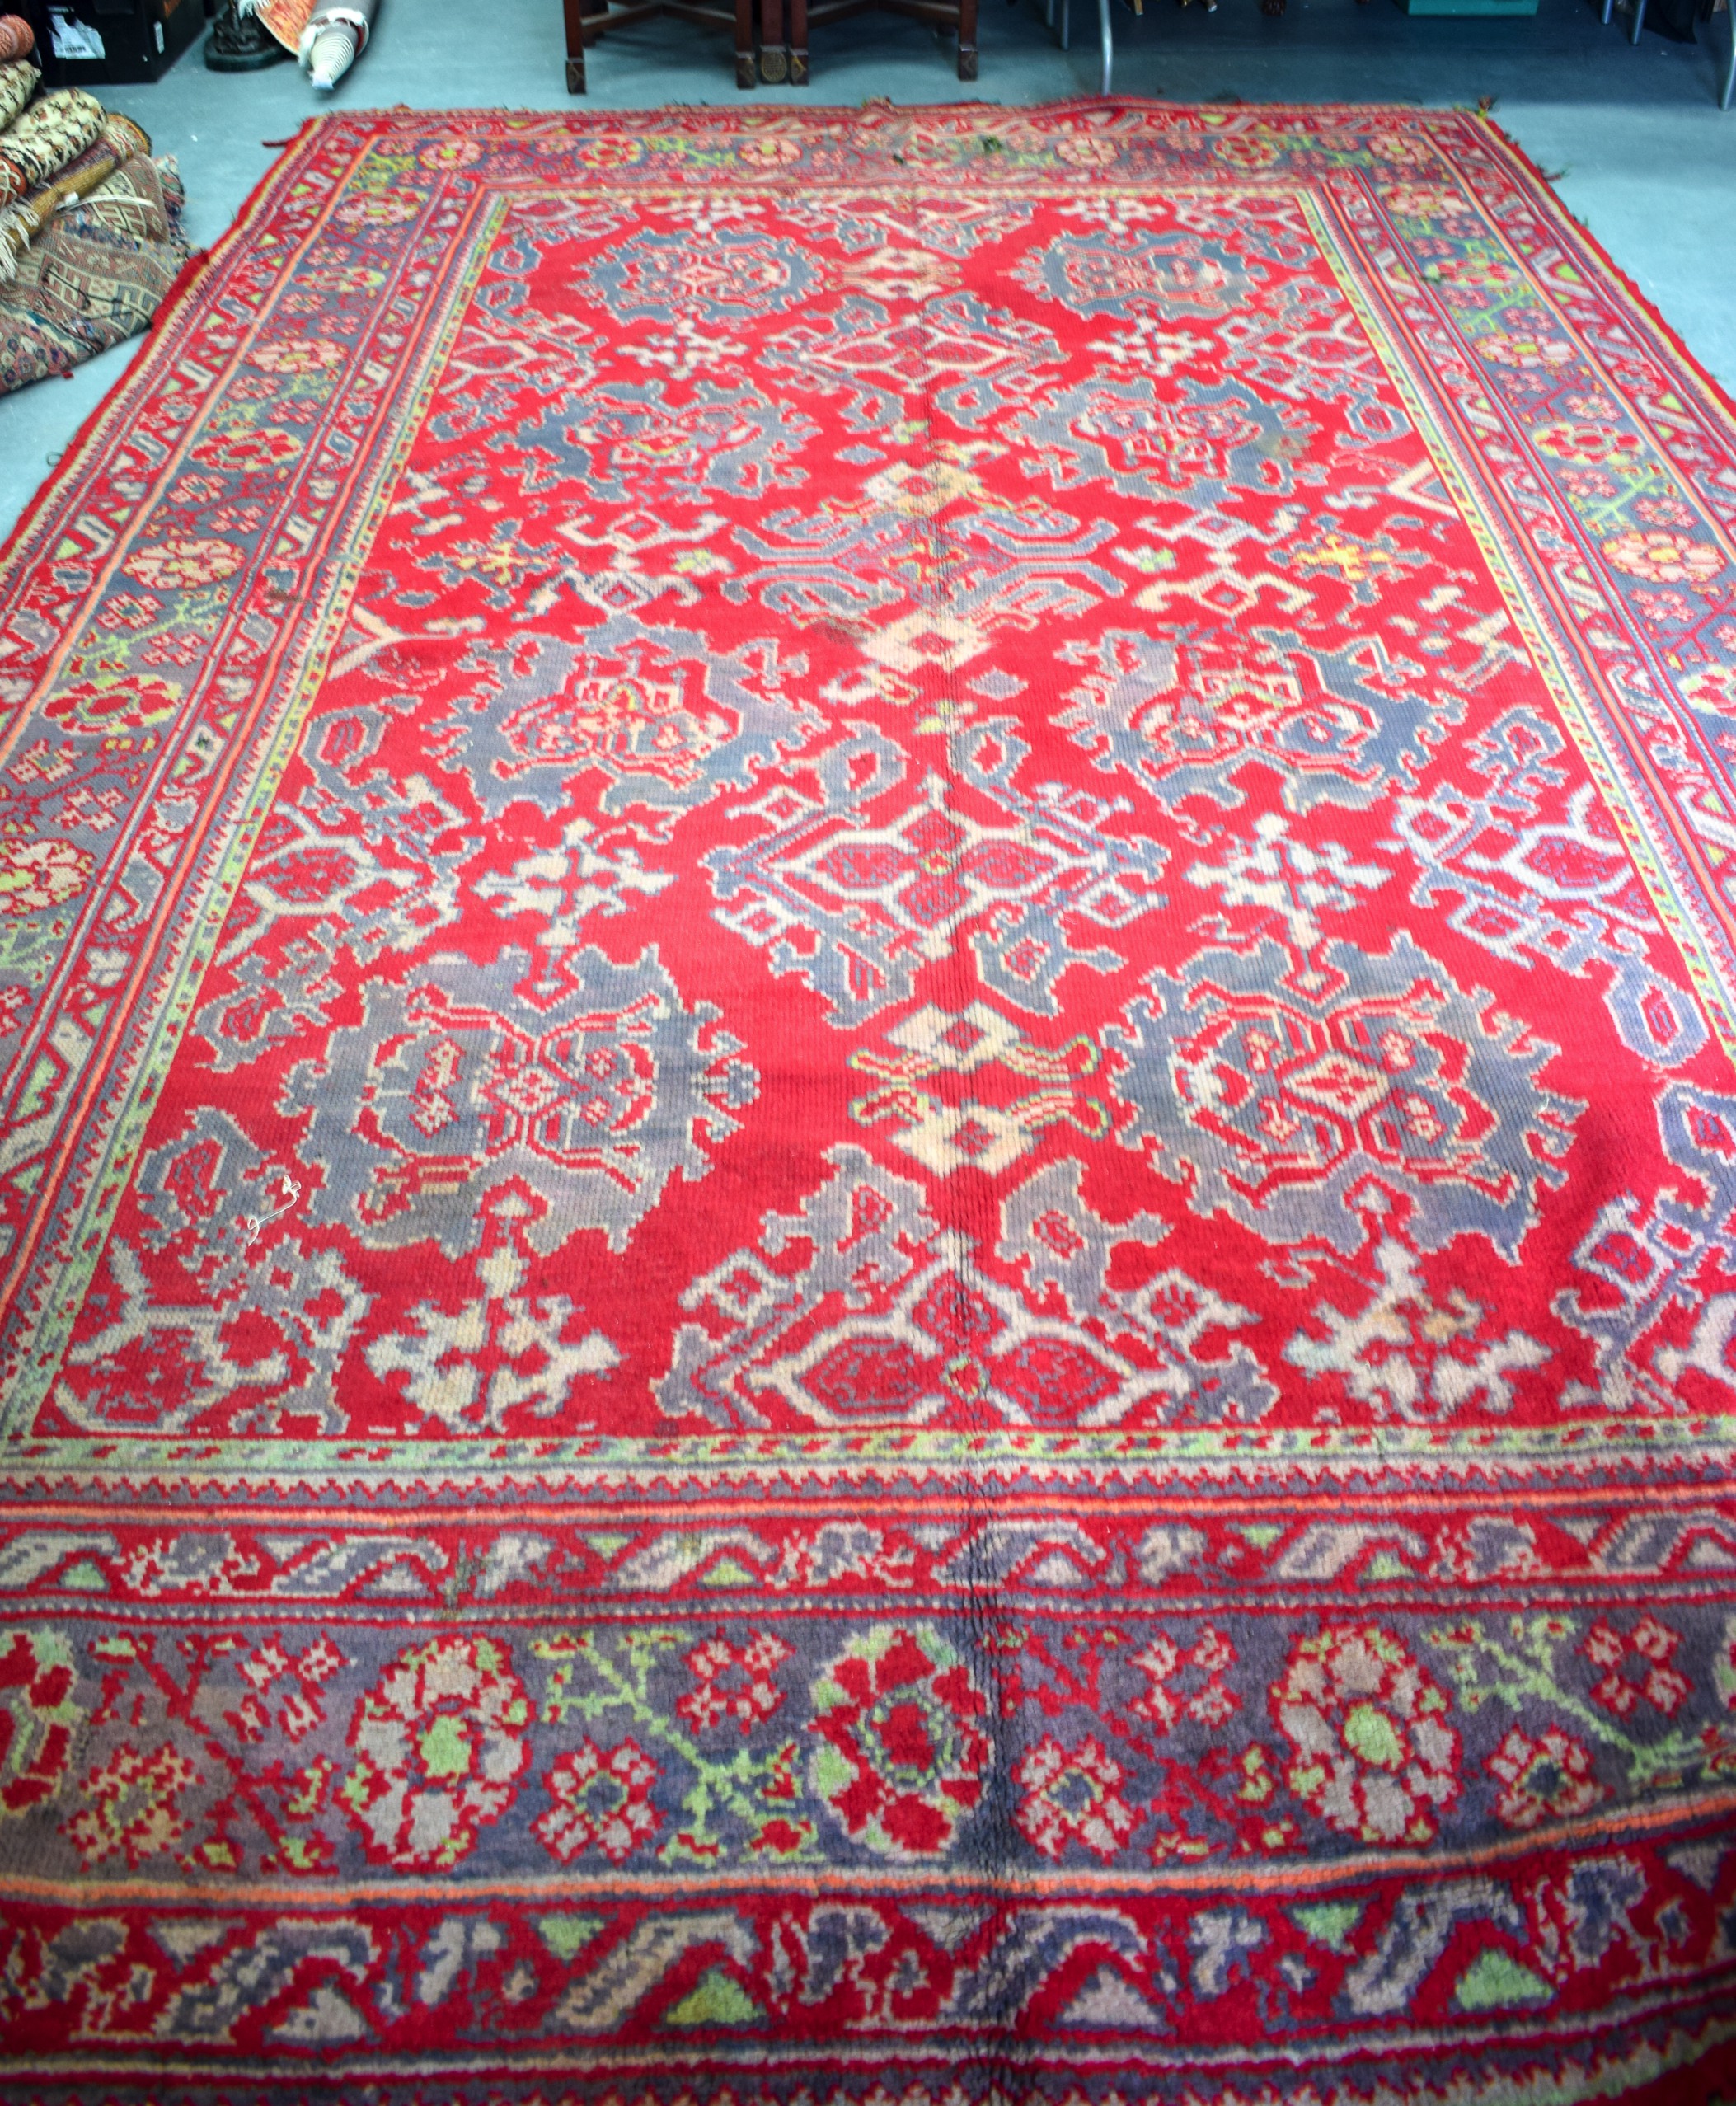 A HUGE RED GROUND PERSIAN RUG, decorated with foliage. 427 cm x 278 cm.